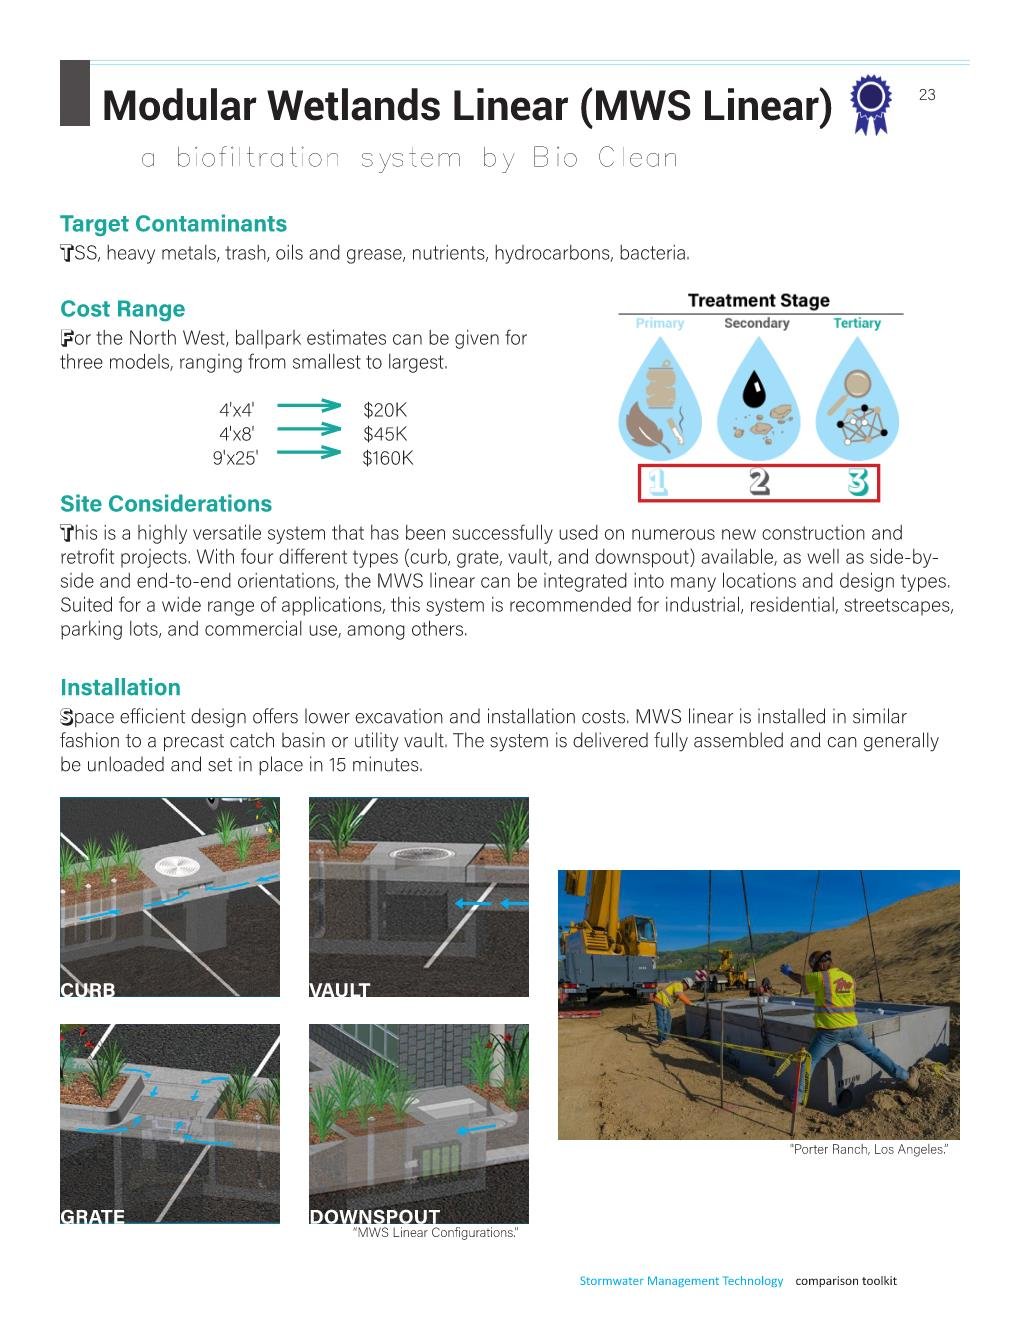 Stormwater Management Technology Comparison Toolkit Page 023.jpg